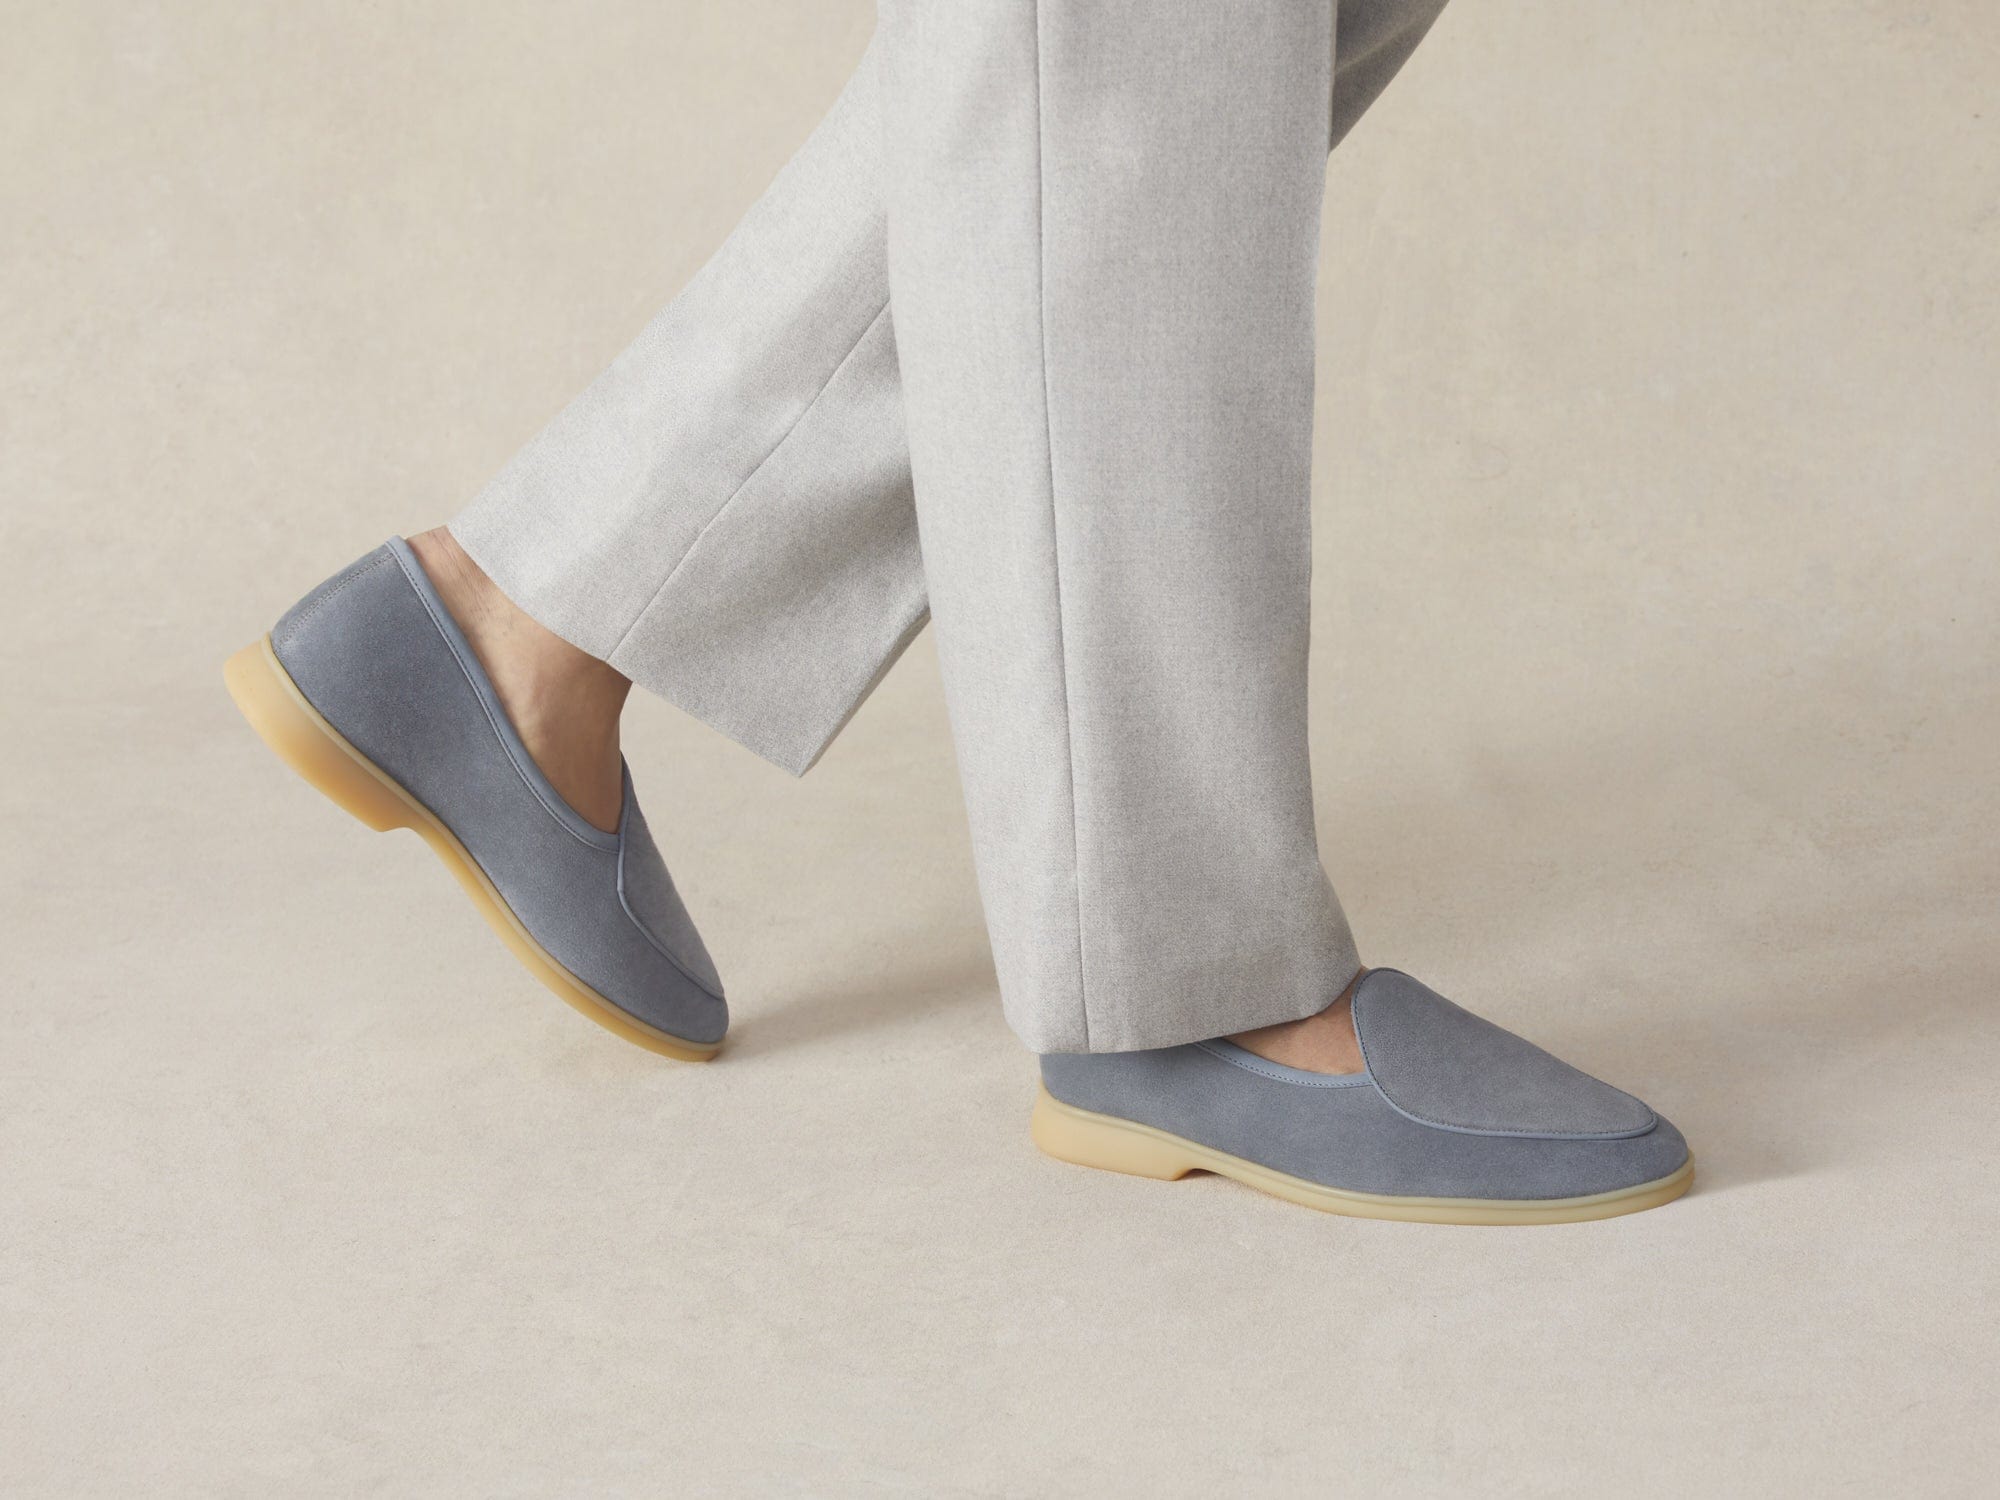 Stride in Thunder Blue Glove Suede with Natural Sole